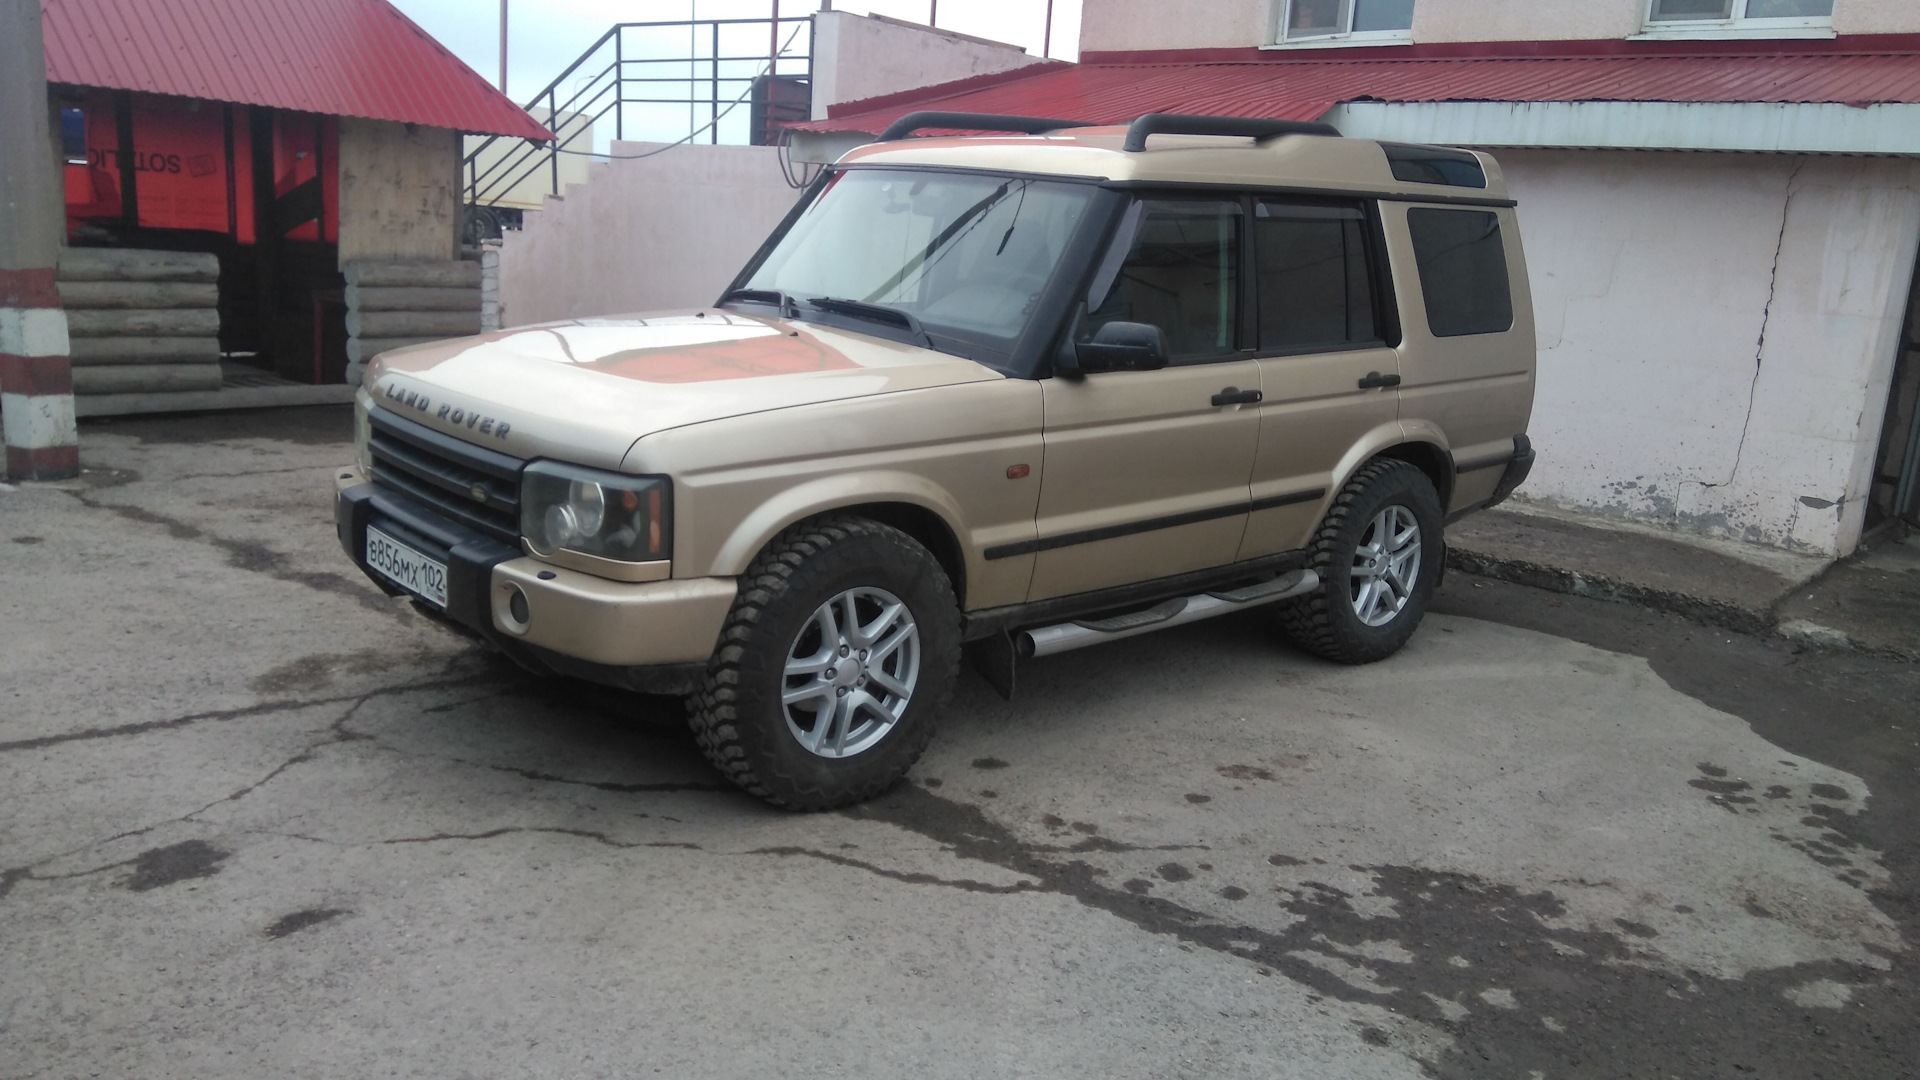 Ленд ровер дискавери 2.5 дизель. Land Rover Discovery 2 1999. Land Rover Discovery 2 диски от БМВ. Discovery 2 диски BMW. Диски БМВ на ленд Ровер Дискавери 2.